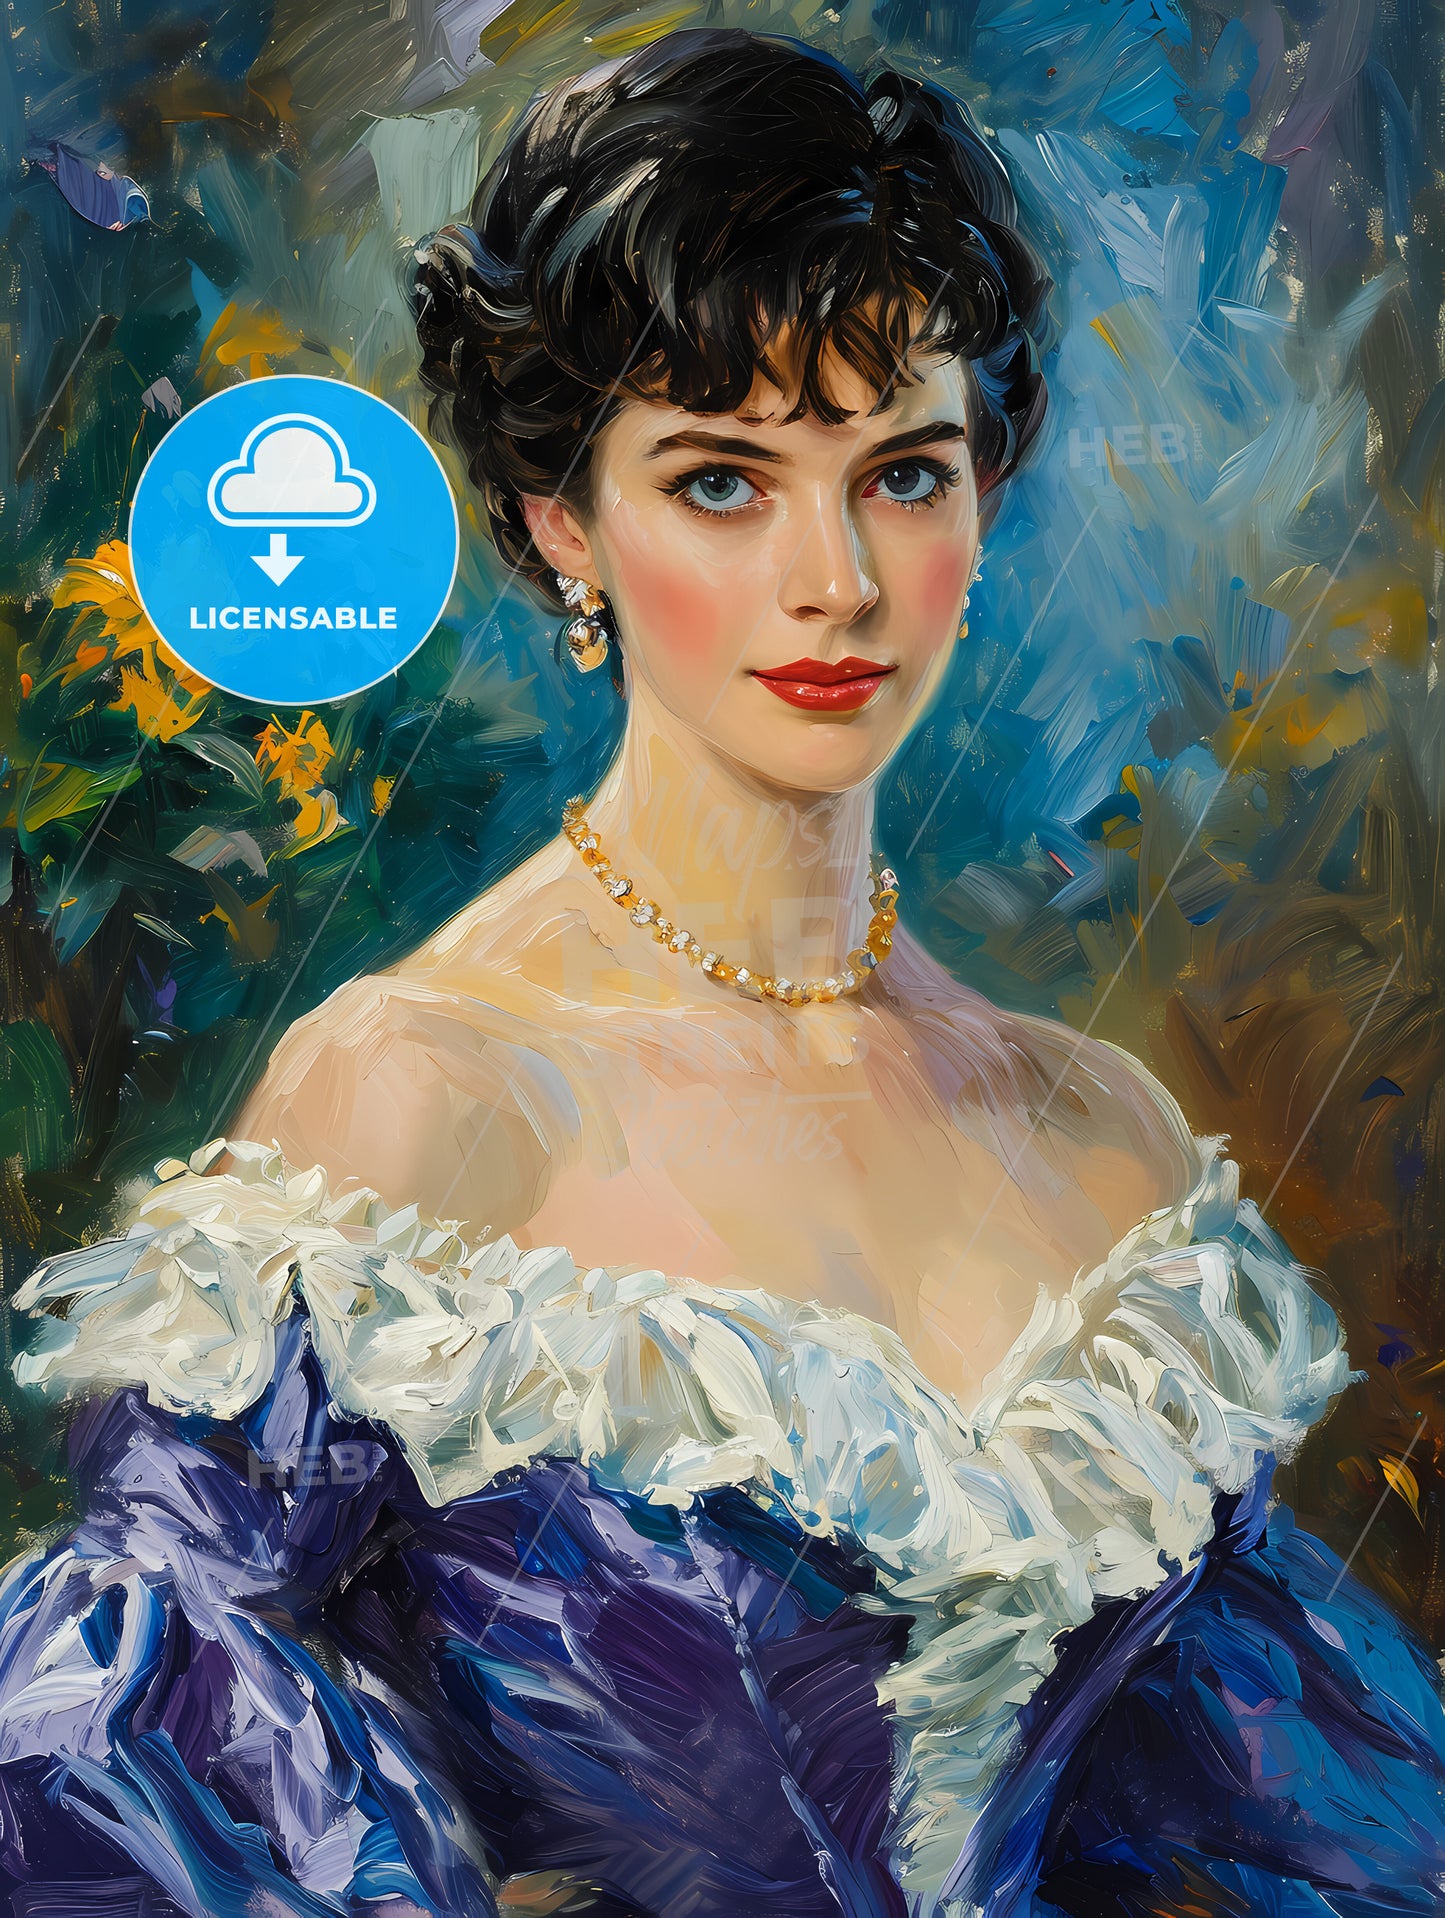 Scarlett Ohara Portrait, A Painting Of A Woman In A Blue Dress